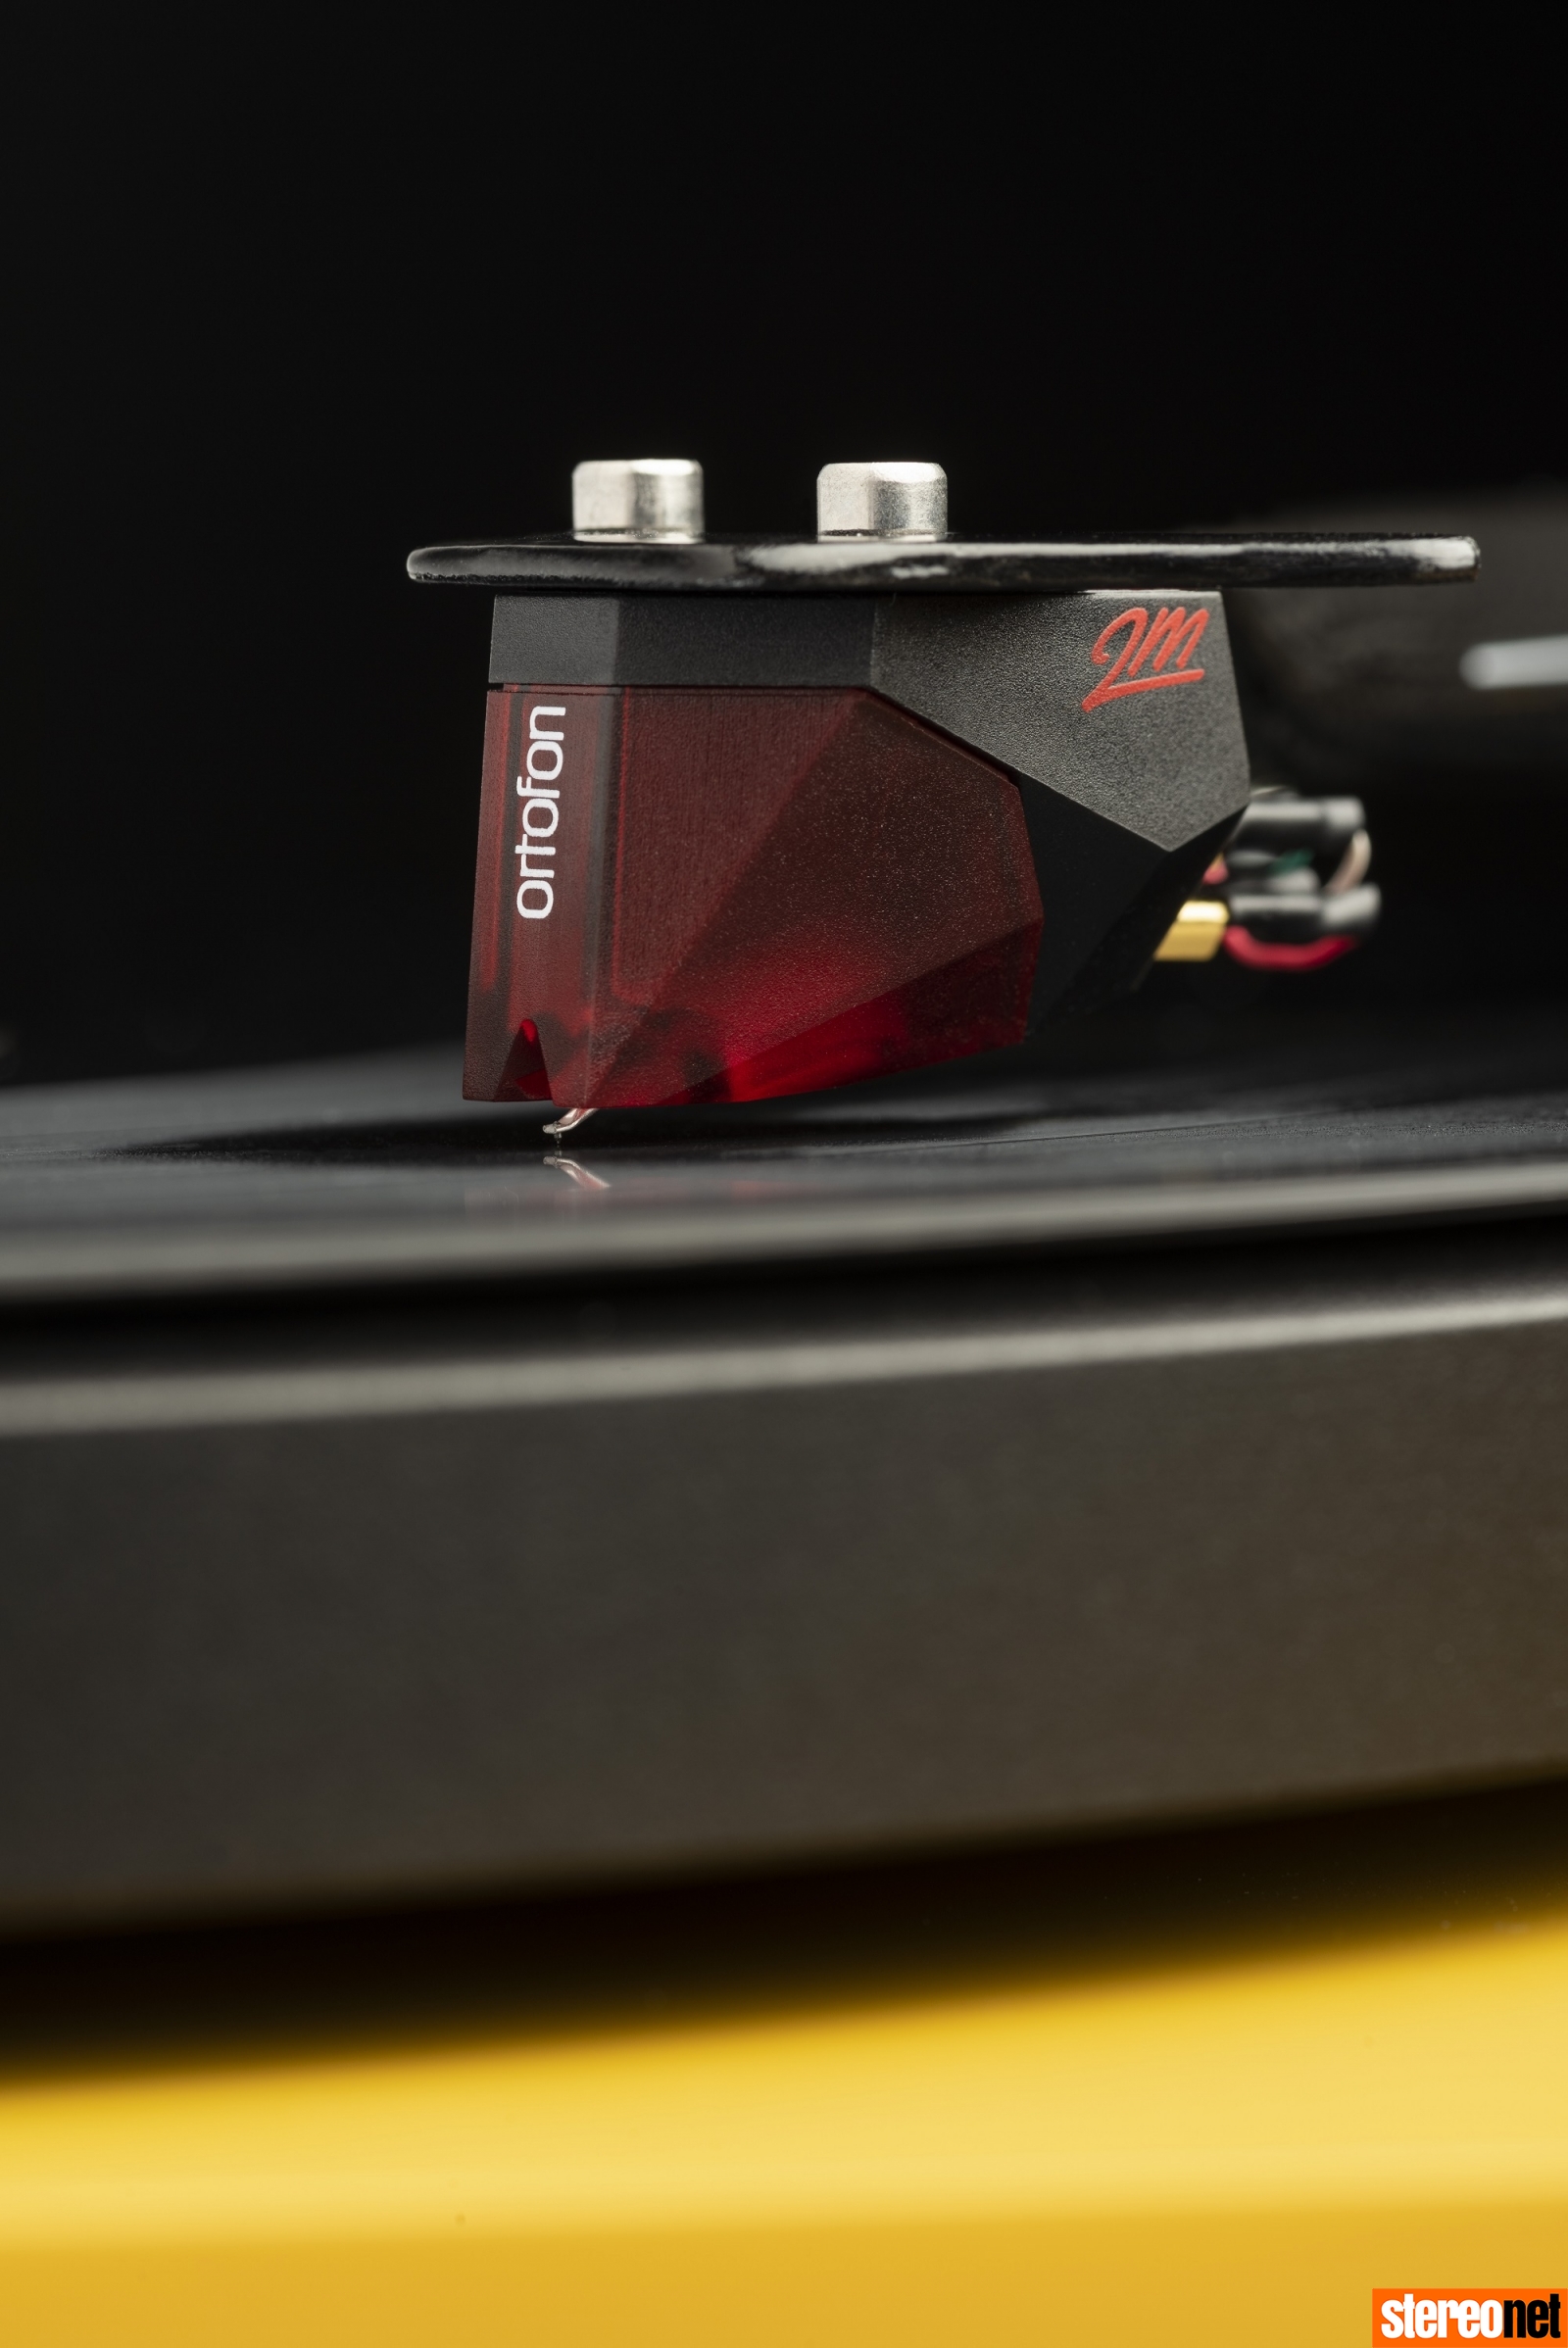 Pro-Ject Debut Carbon EVO review